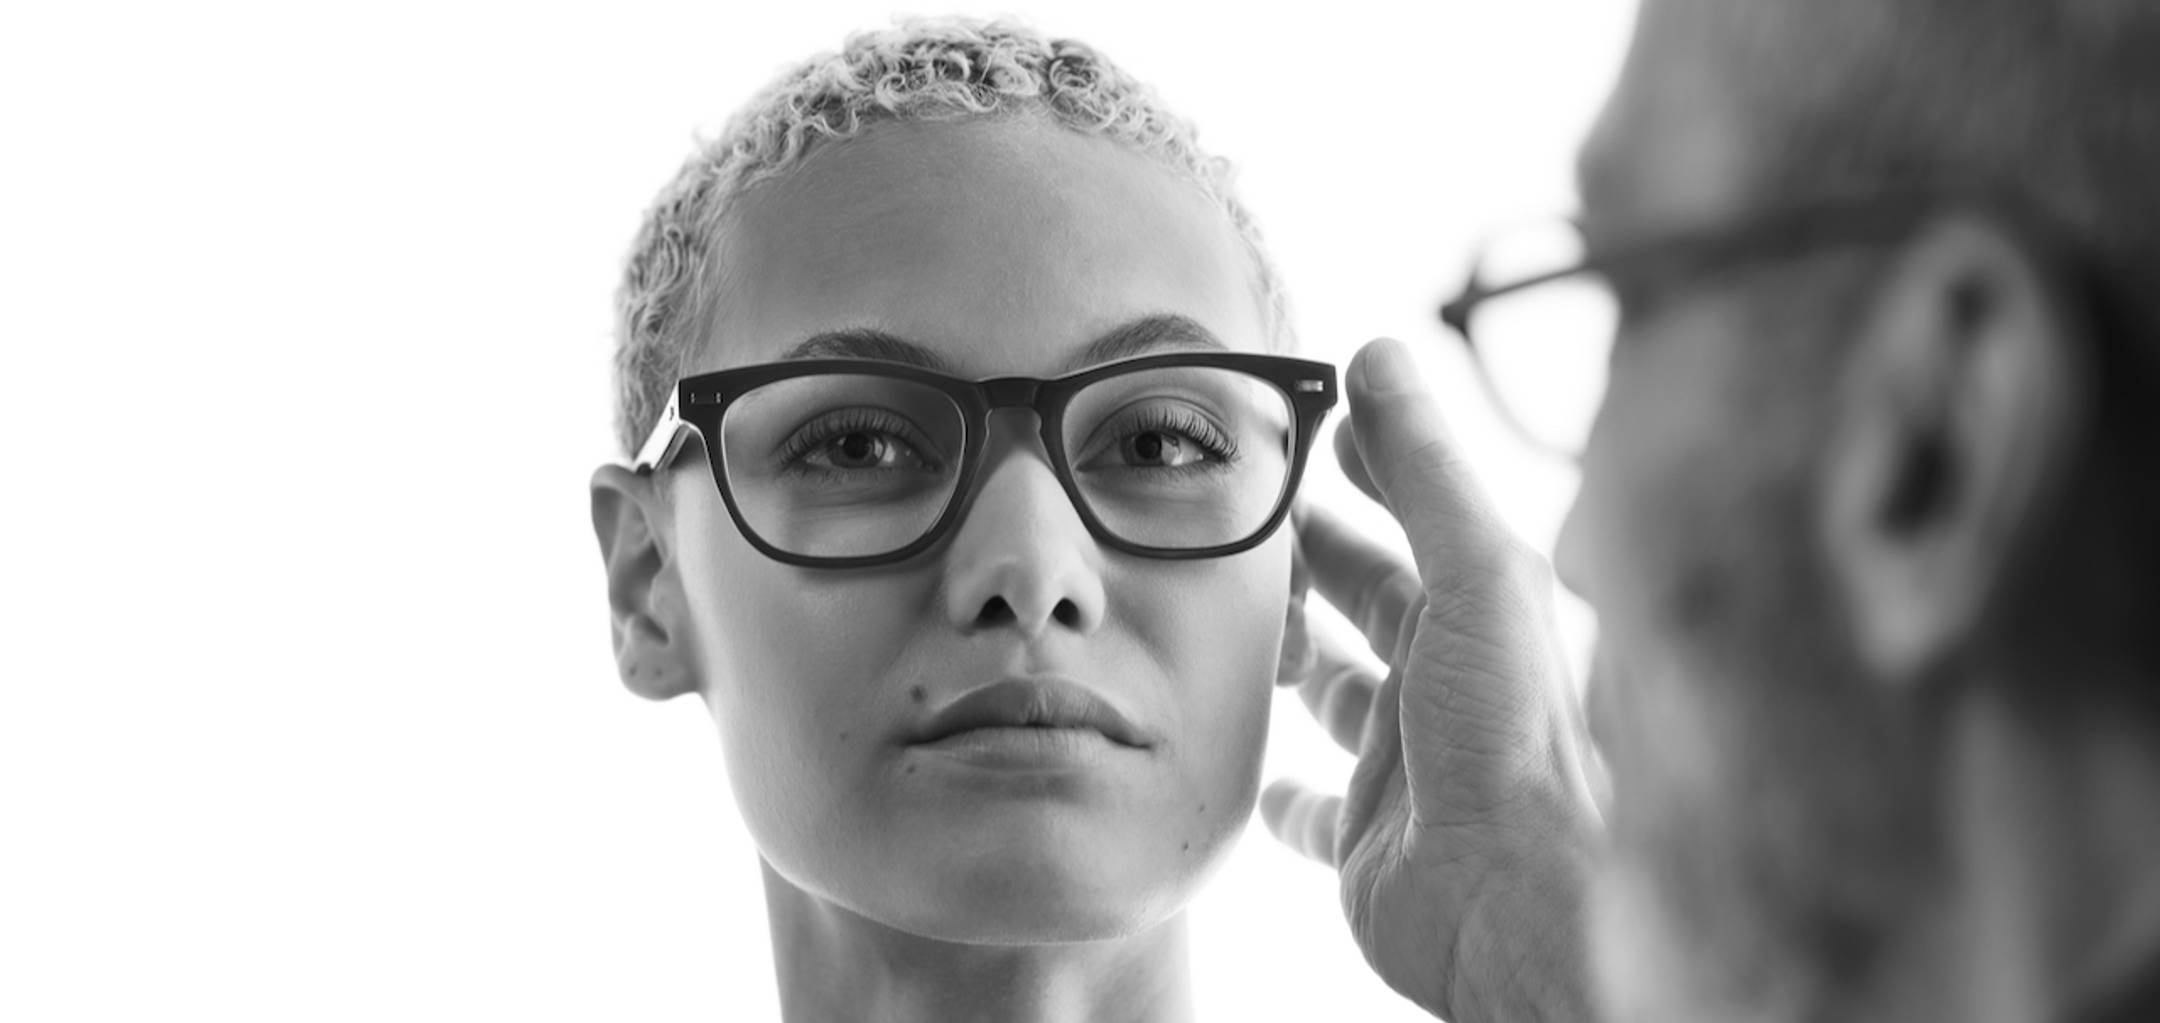 Female model being fitted with Morgenthal Frederics eyeglasses